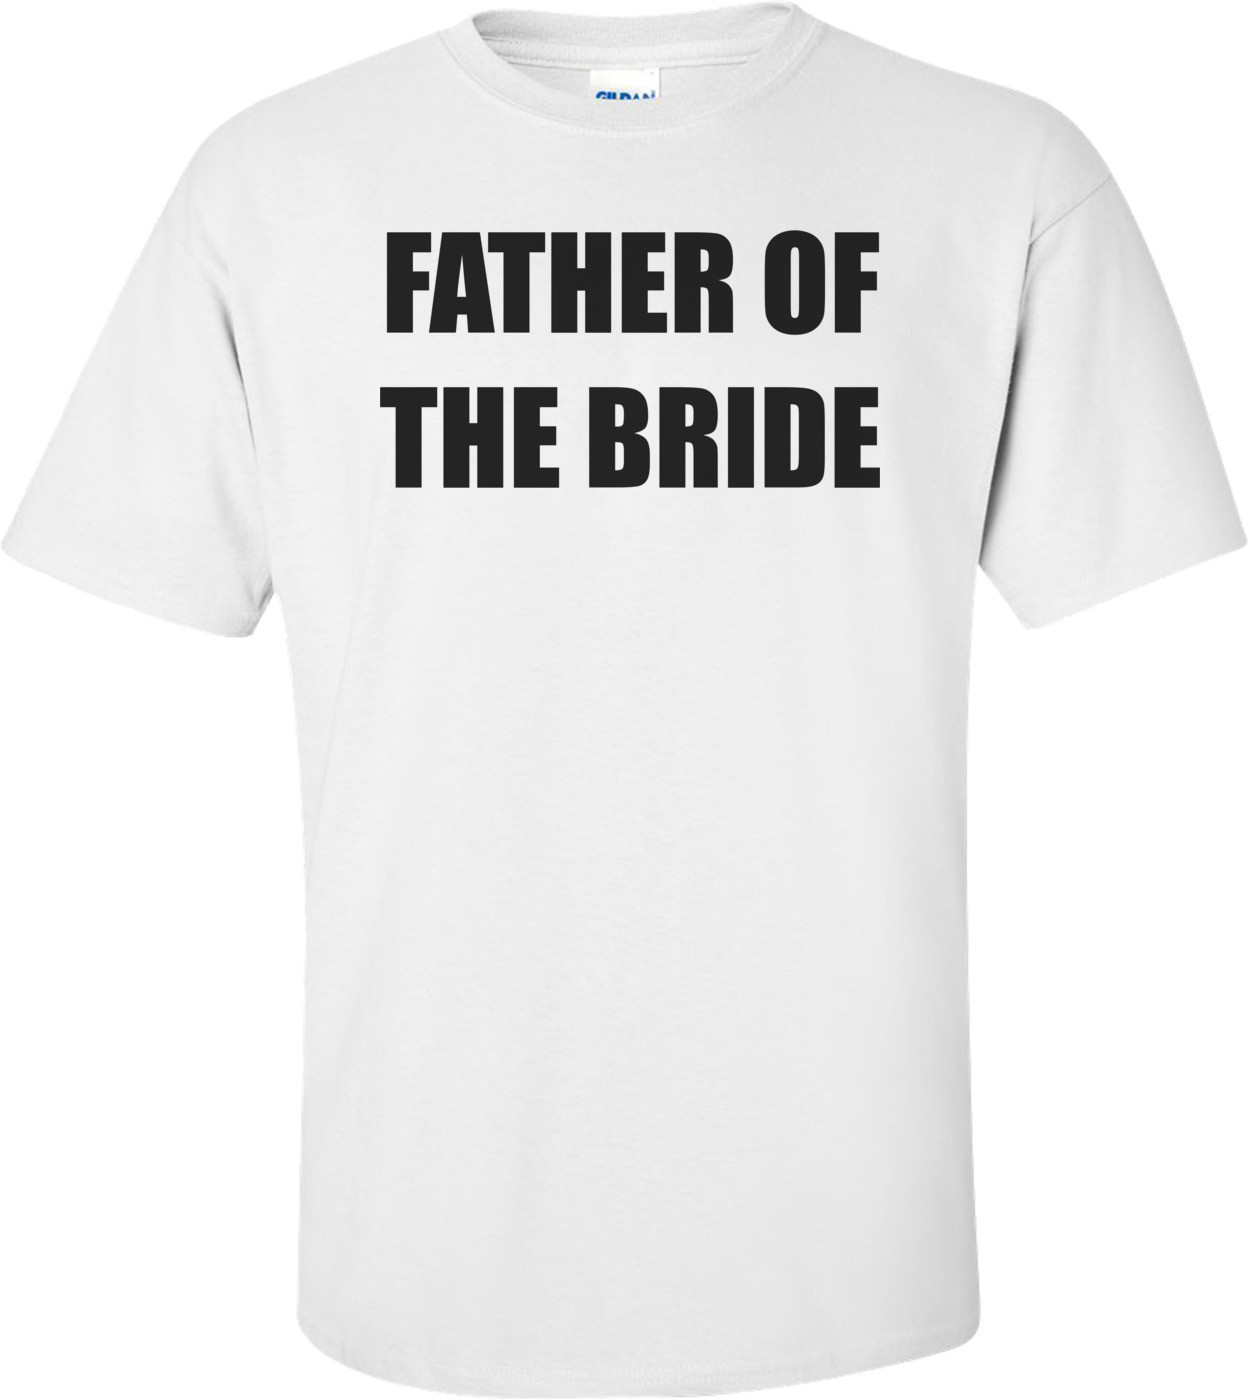 FATHER OF THE BRIDE Shirt